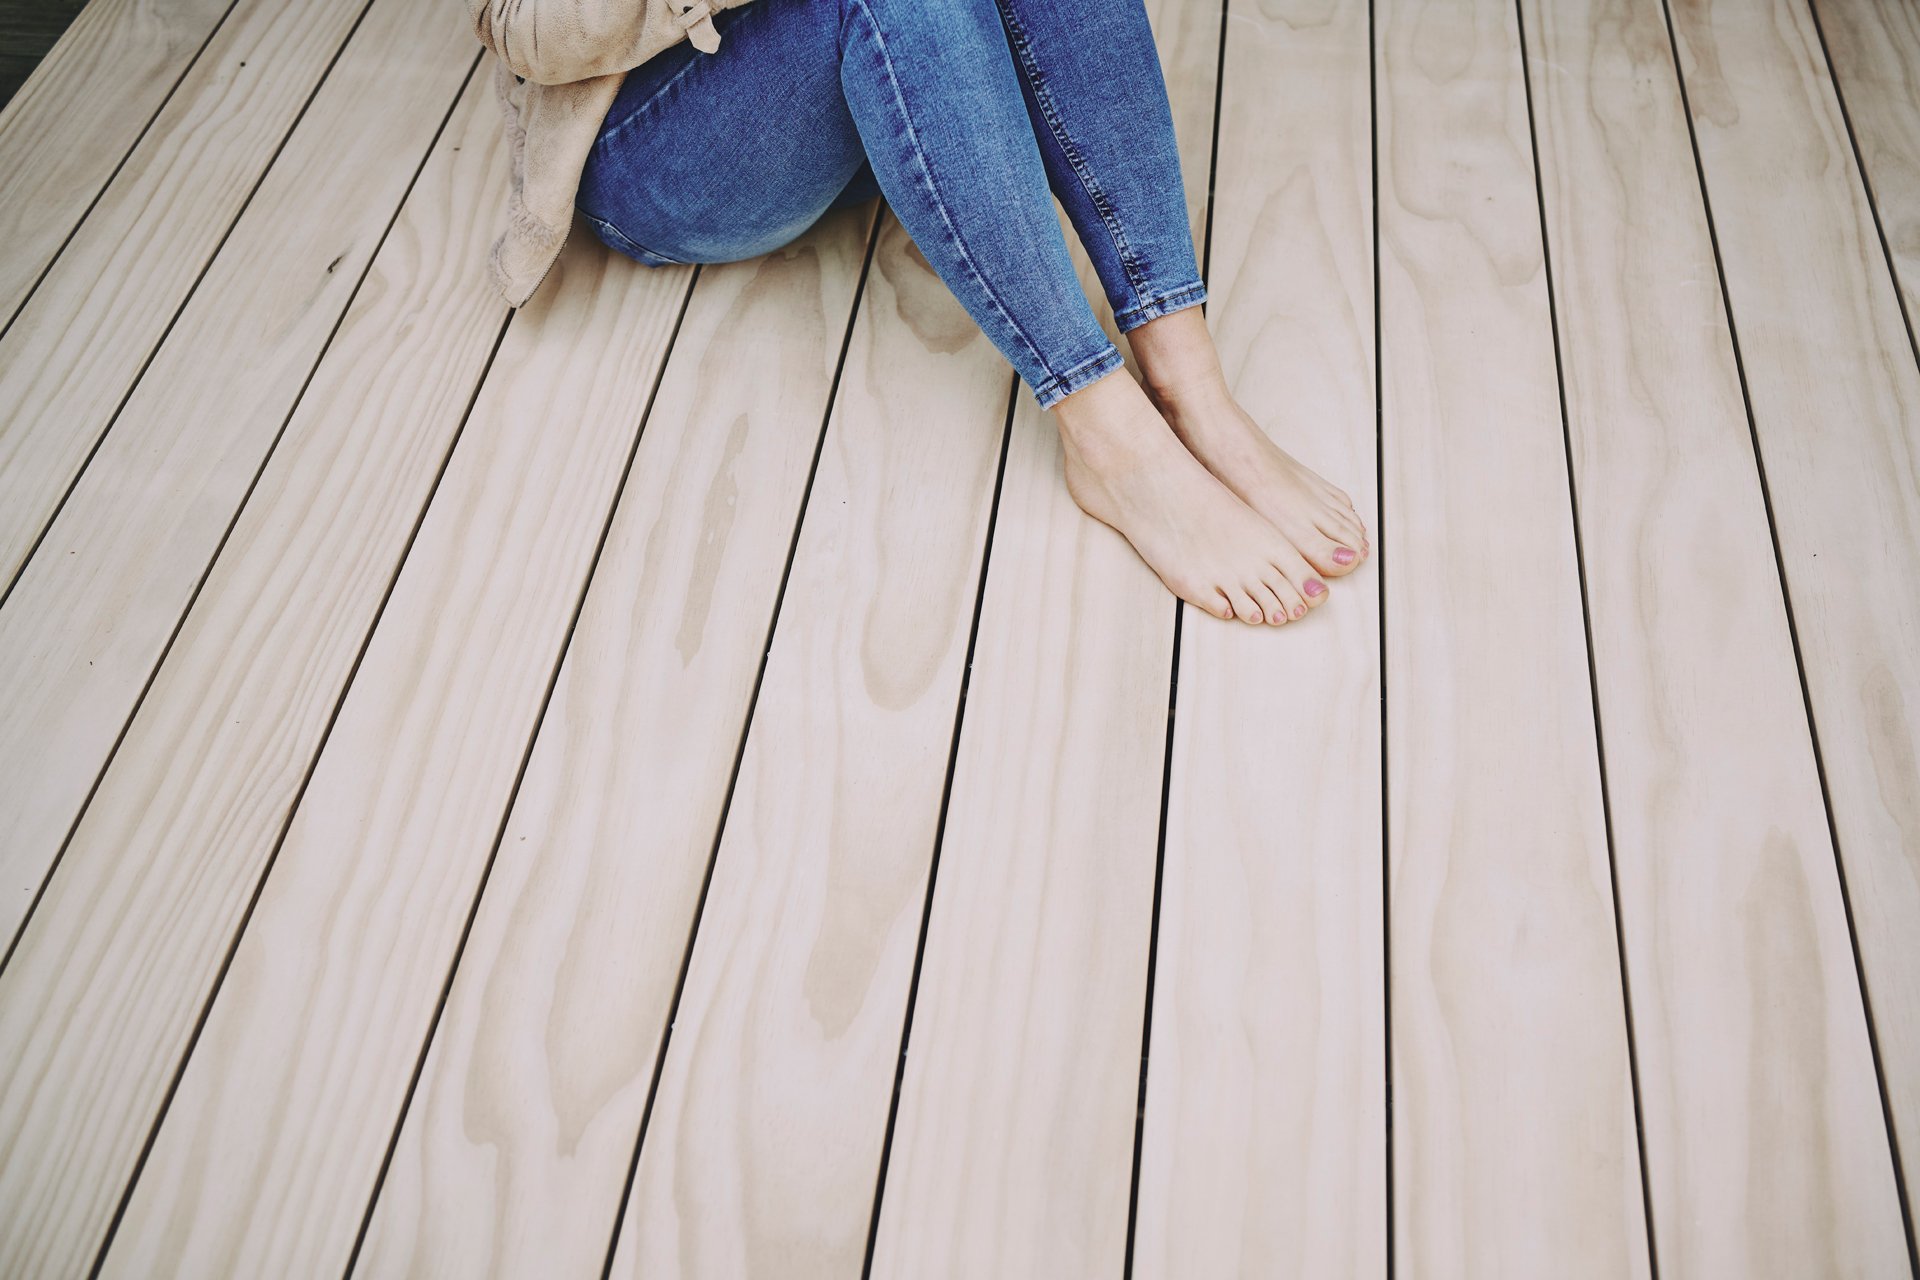 Timber Decking - What is the best timber to use for decking?